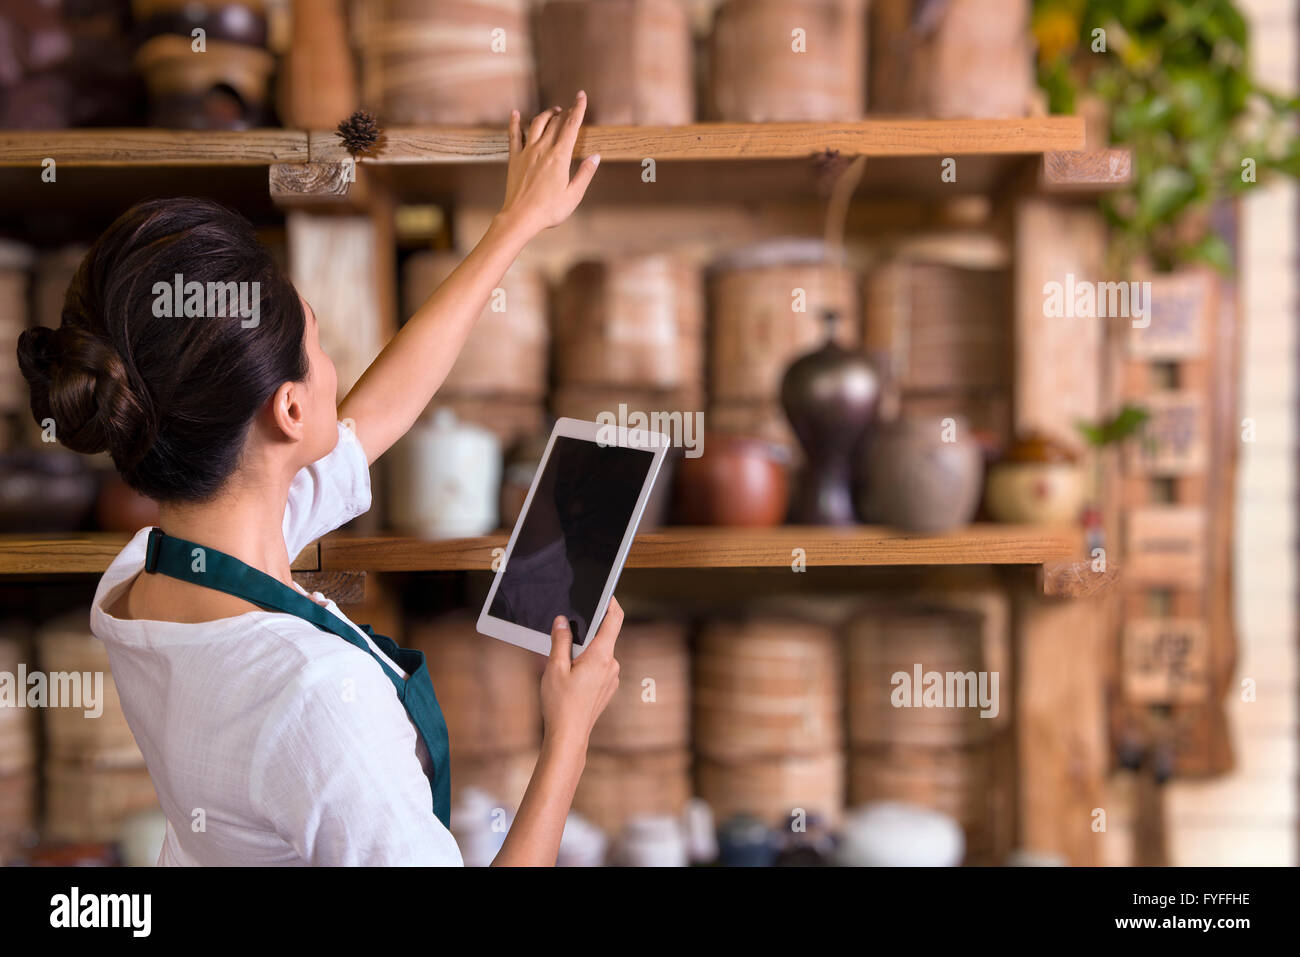 Tea house owner checking inventory using digital tablet Stock Photo